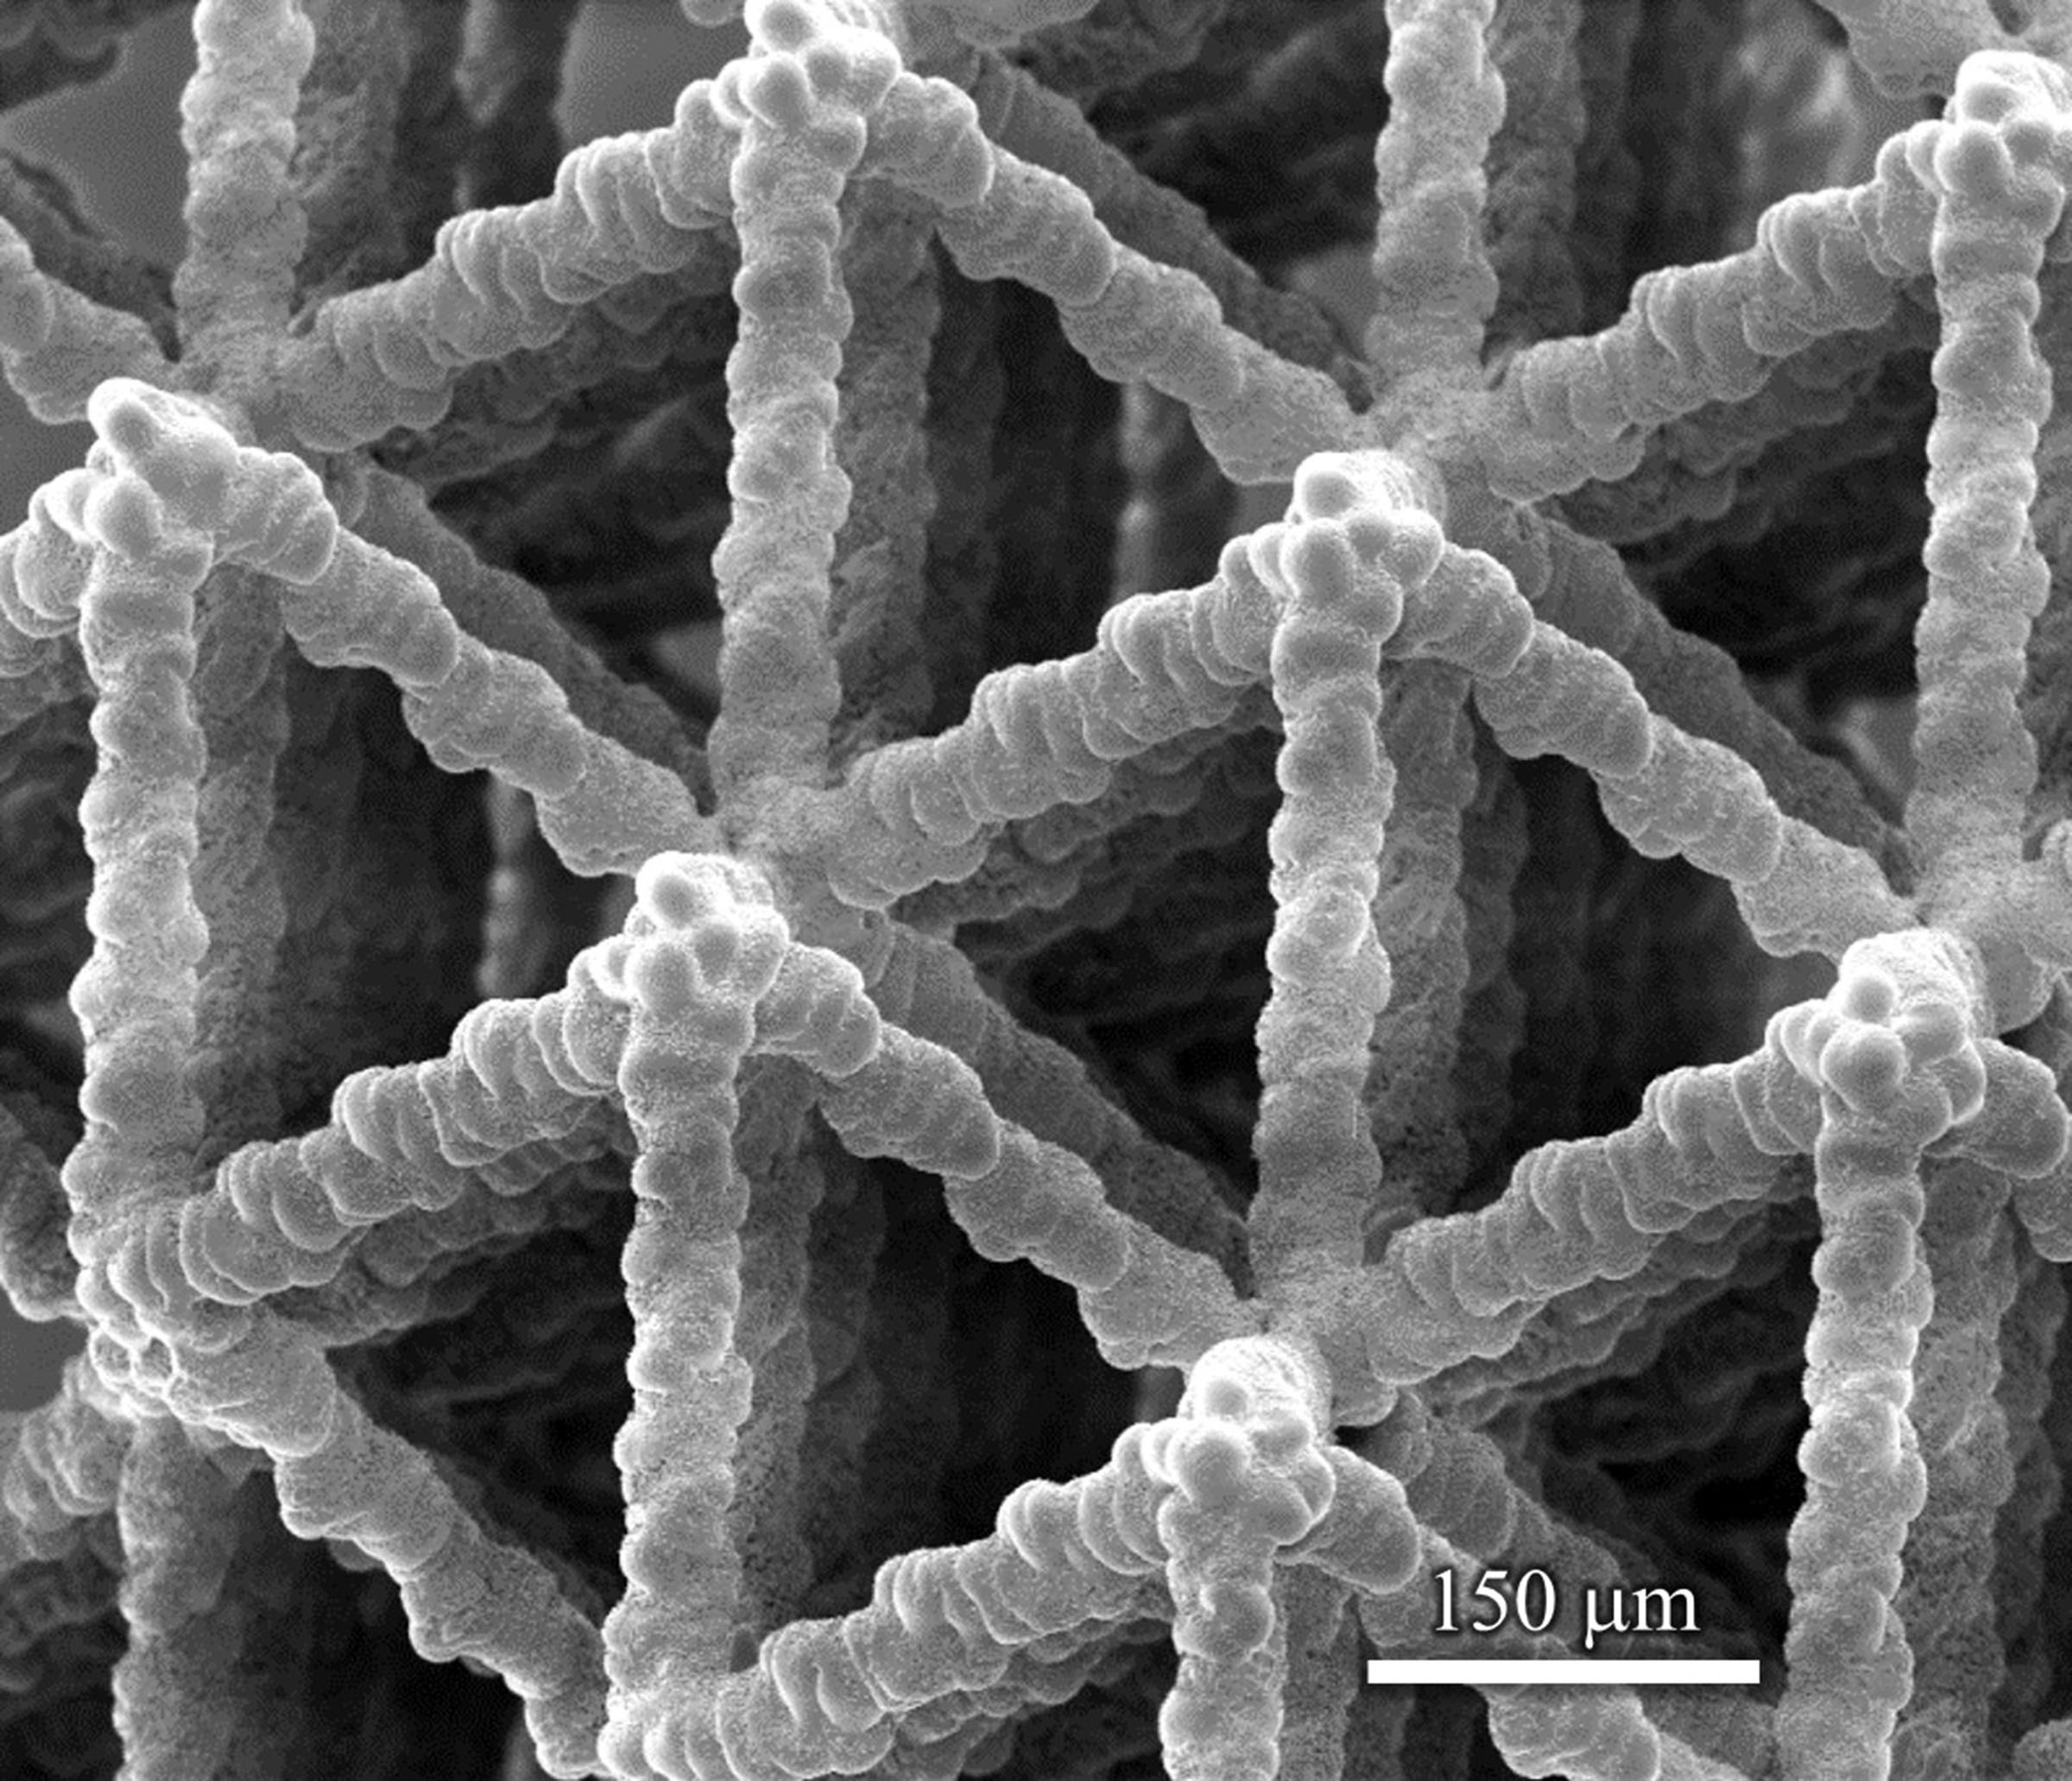 This image shows one of the microstructures developed at Washington State University, which could find use in batteries, lightweight ultrastrong materials, catalytic converters, supercapacitors and biological scaffolds. Image: Washington State University.